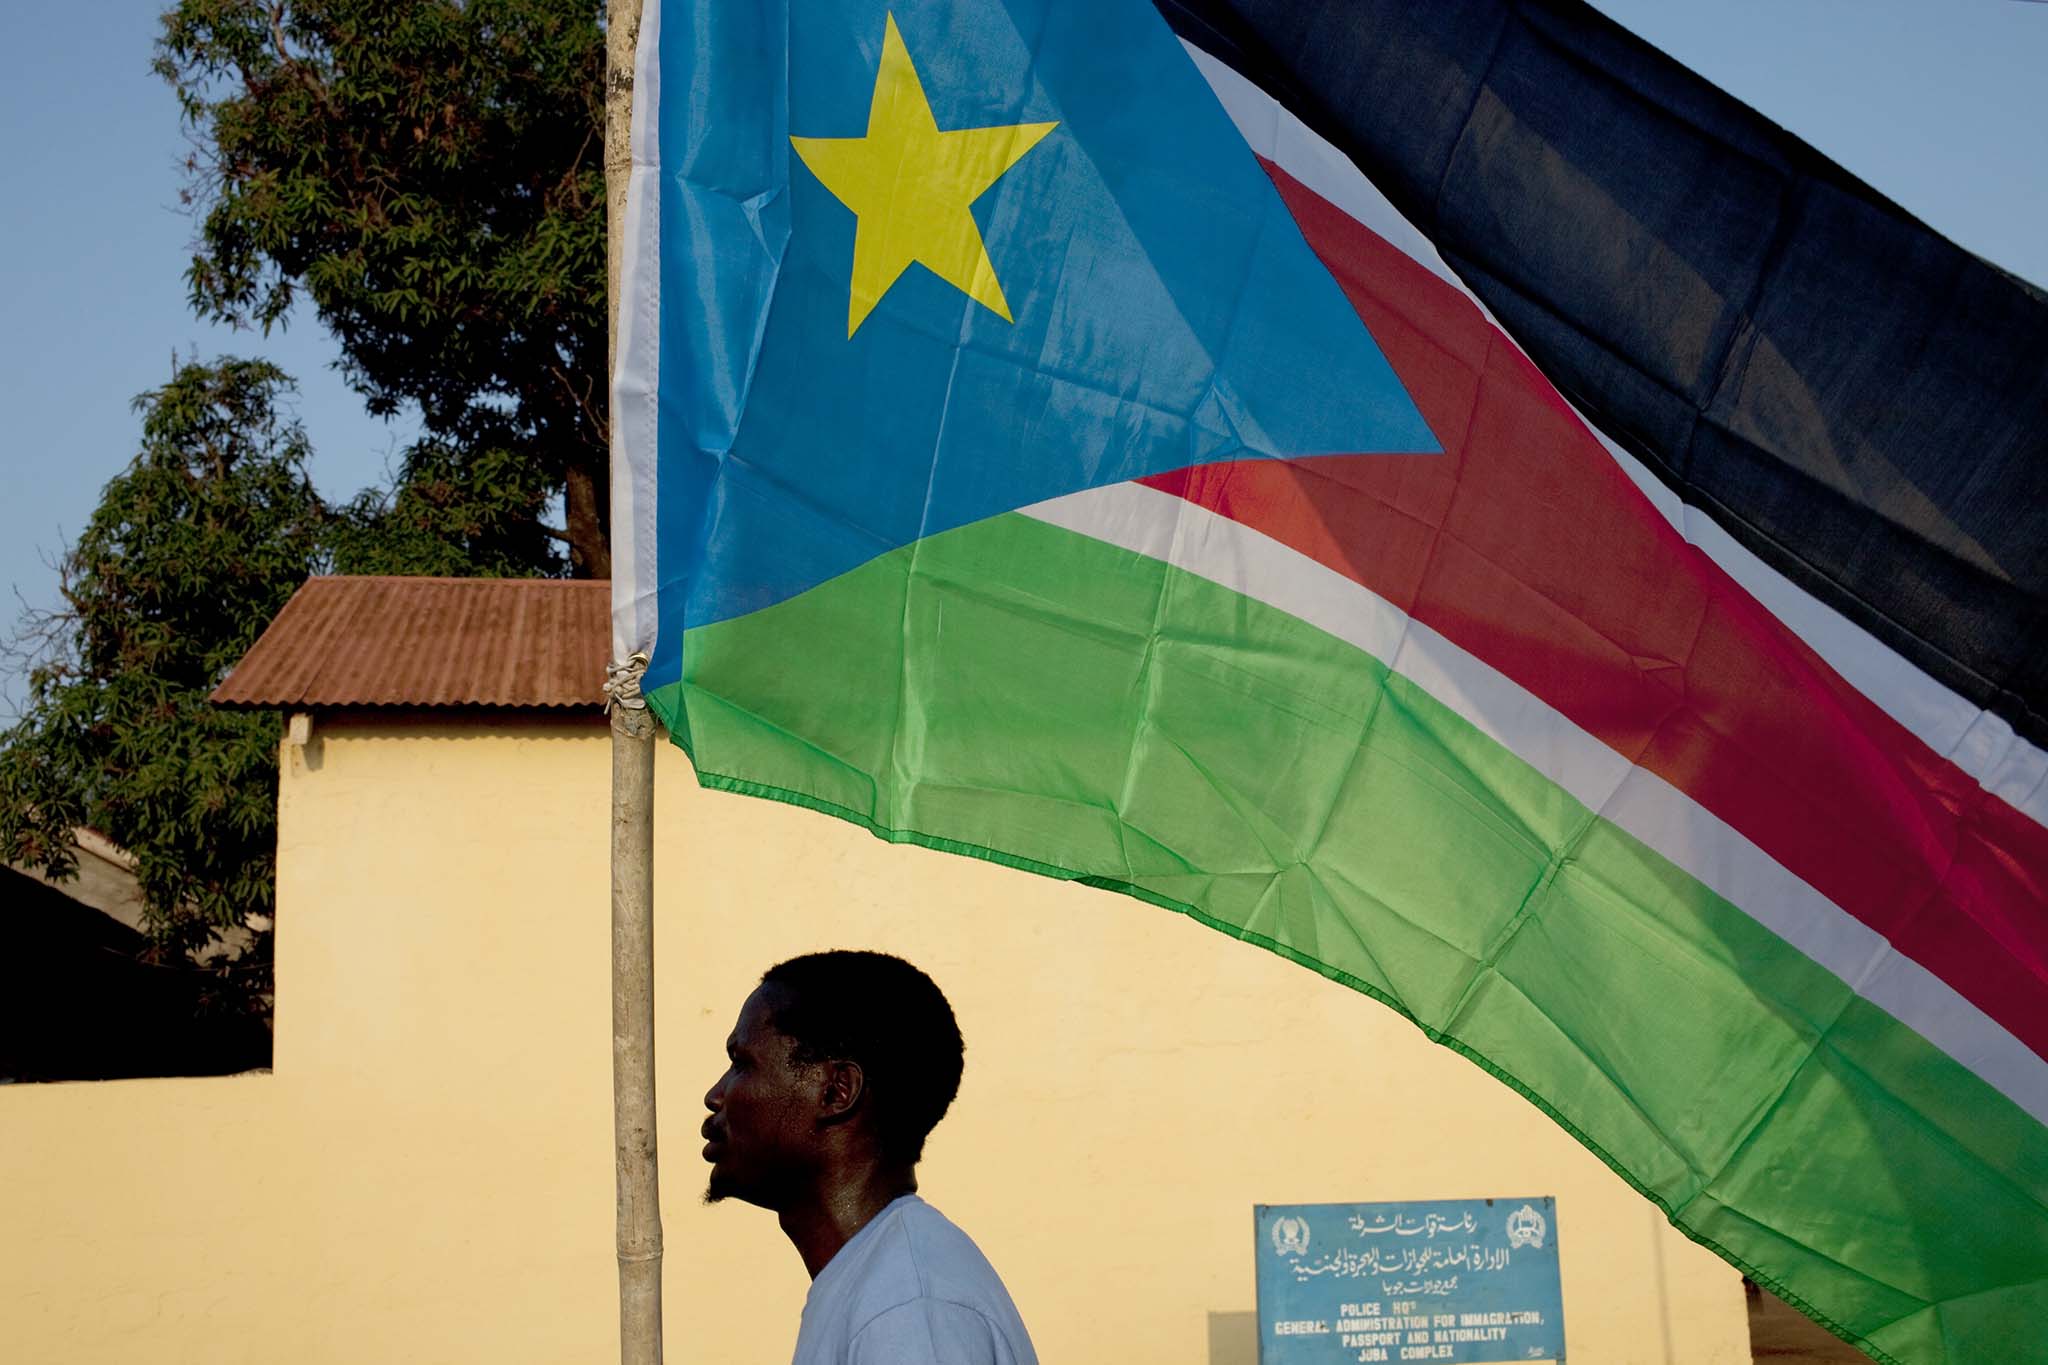 A man carries a southern Sudan flag through the town of Juba, southern Sudan, July 8, 2011. (Tyler Hicks/The New York Times)